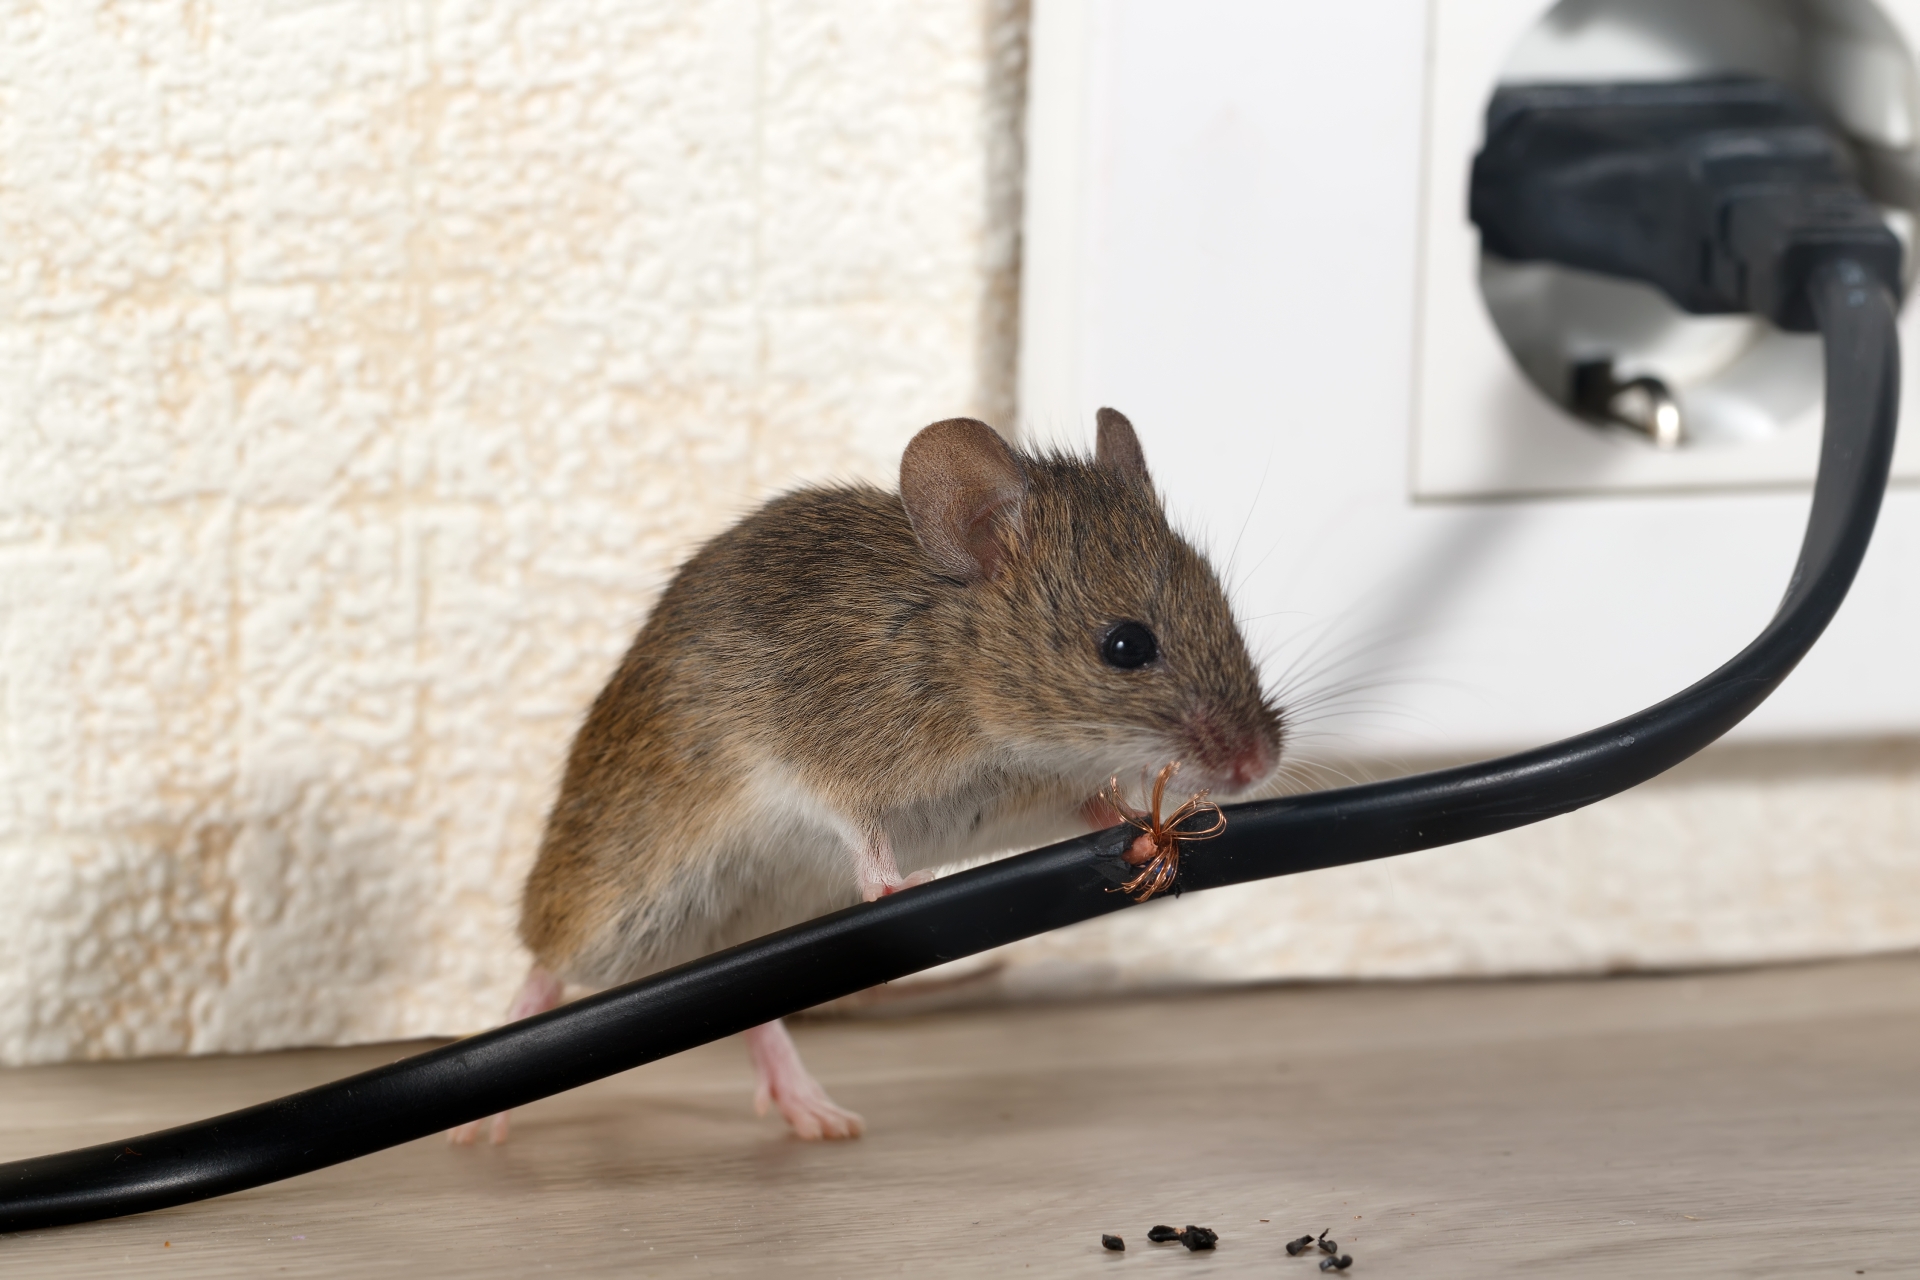 Mice Infestation, Pest Control in Cricklewood, NW2. Call Now 020 8166 9746